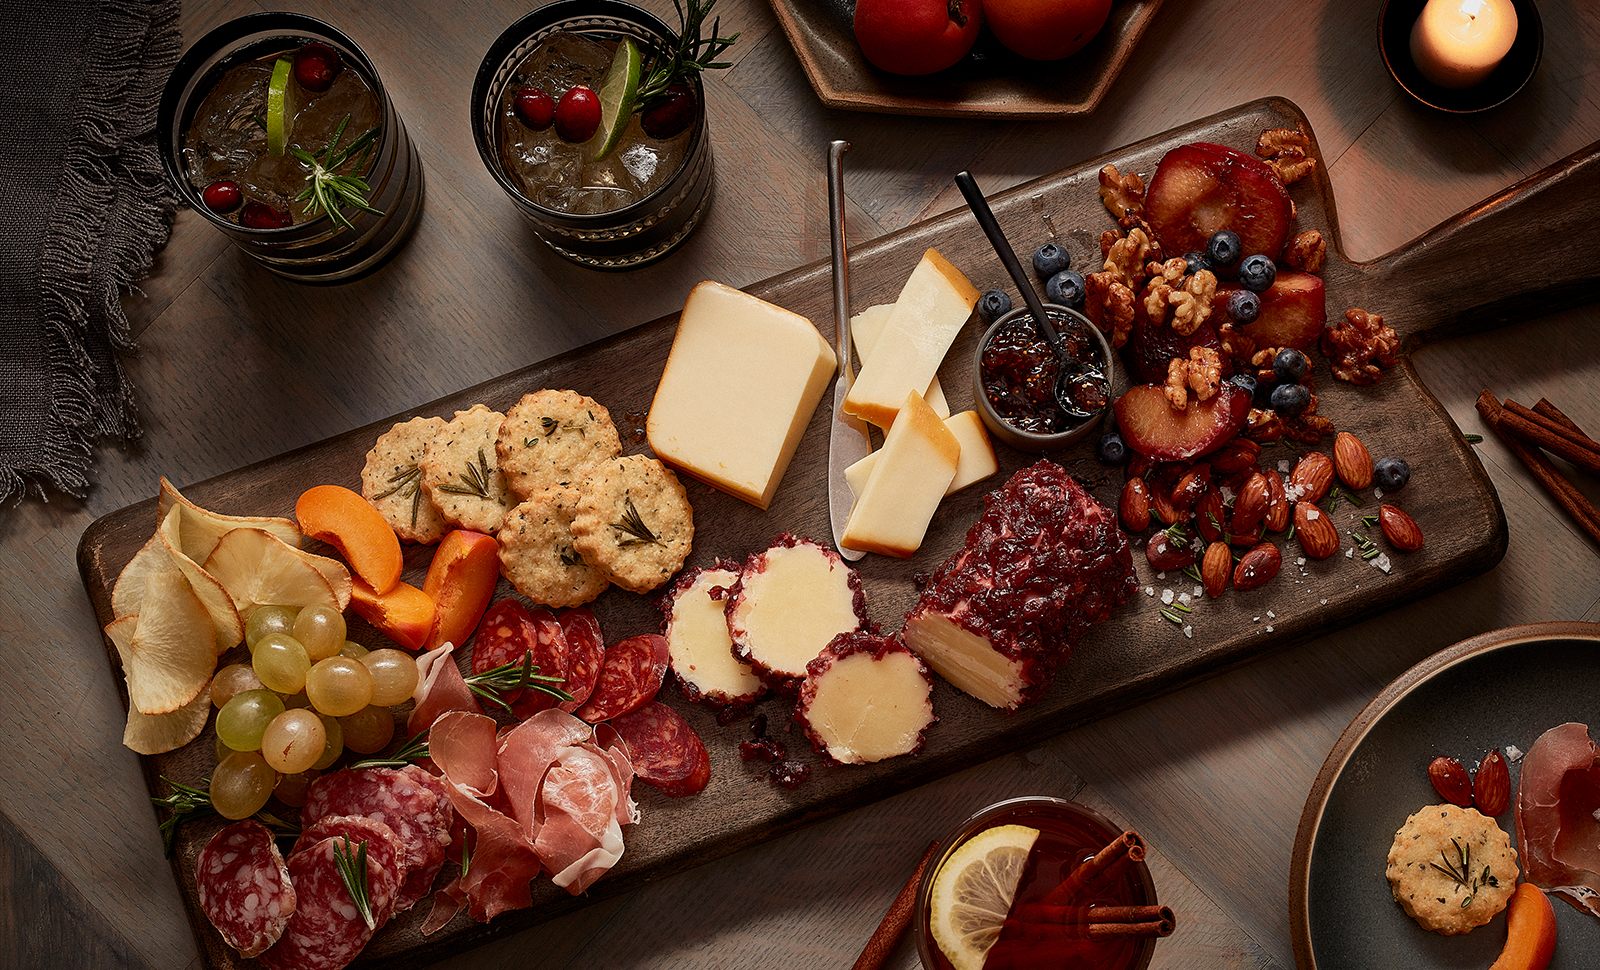 A fall inspired charcuterie board filled with slices naturally aged cheddar, cheddar logs, almonds, raspberries, blueberries, variety of sliced meats, grapes and biscuits.